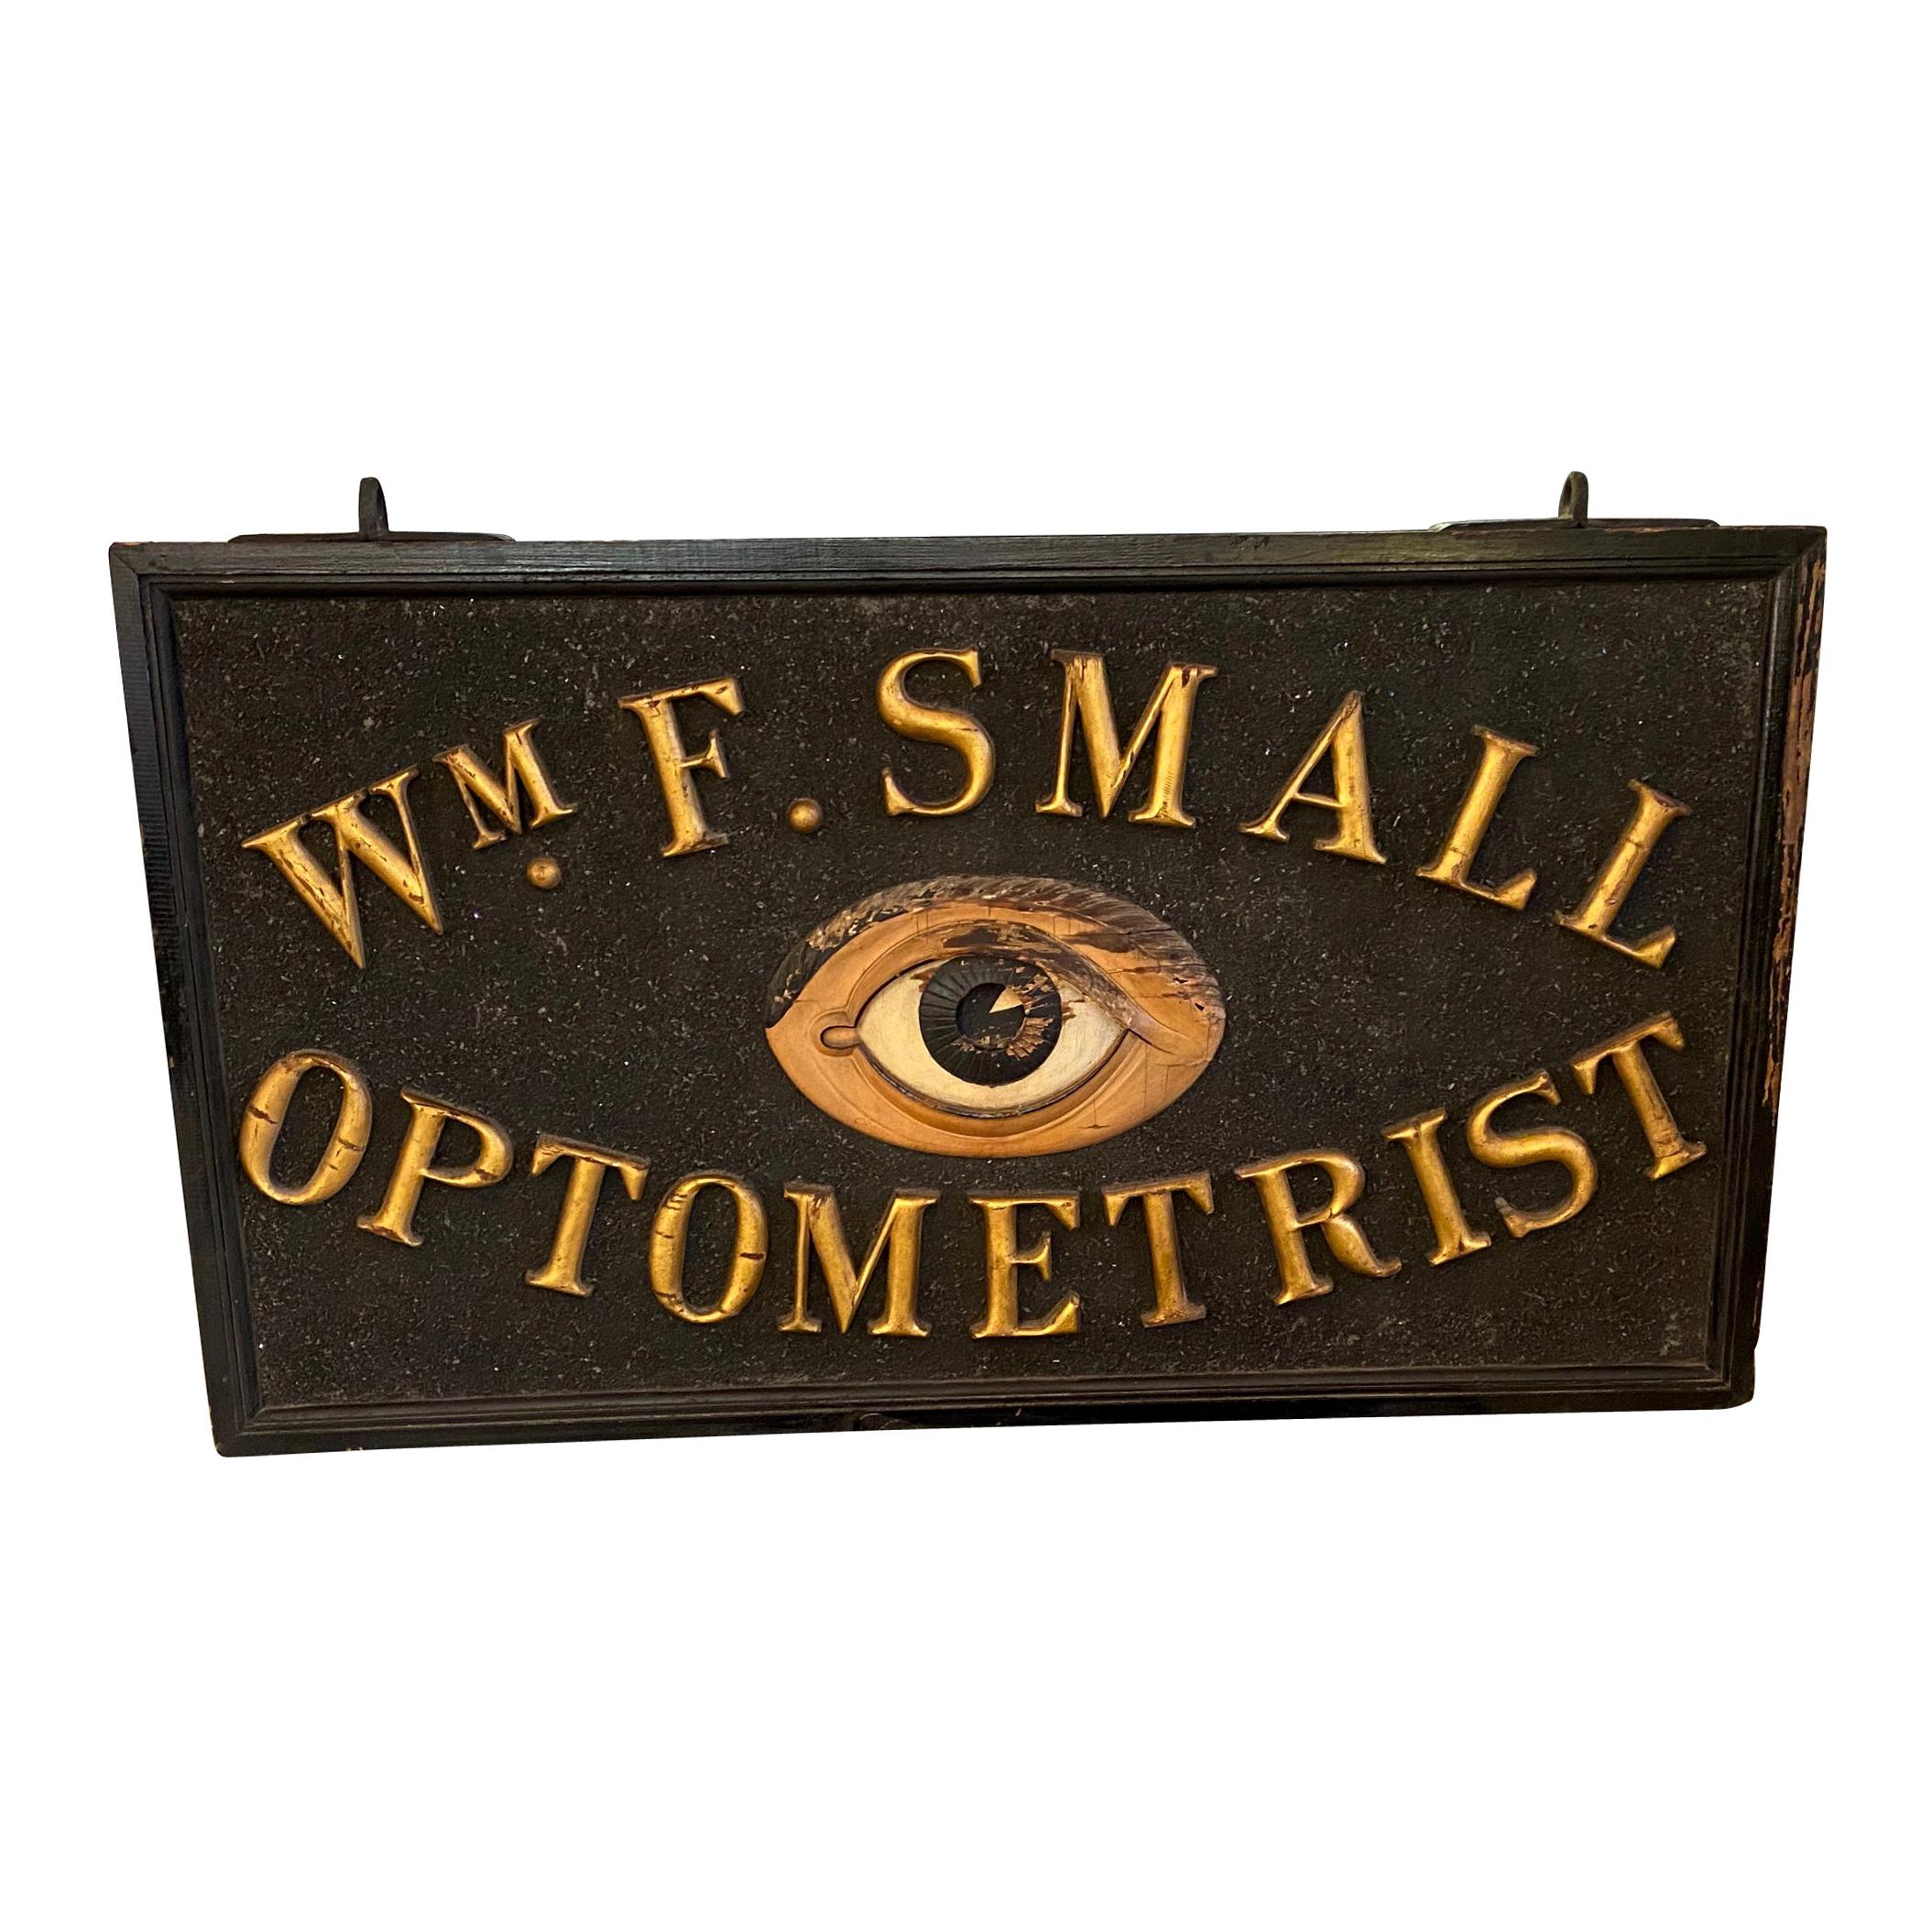 1920s Wooden Double Sided Optometrist Sign with Gilded Letters